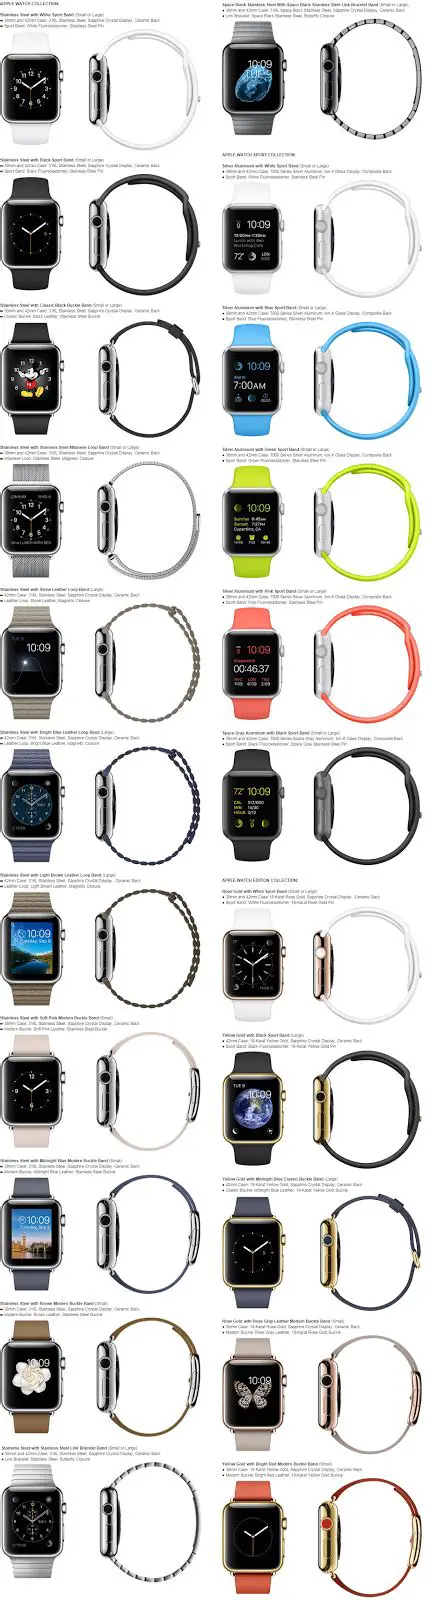 Compatibility Check: Which iPhone Models Work with Apple Watch?